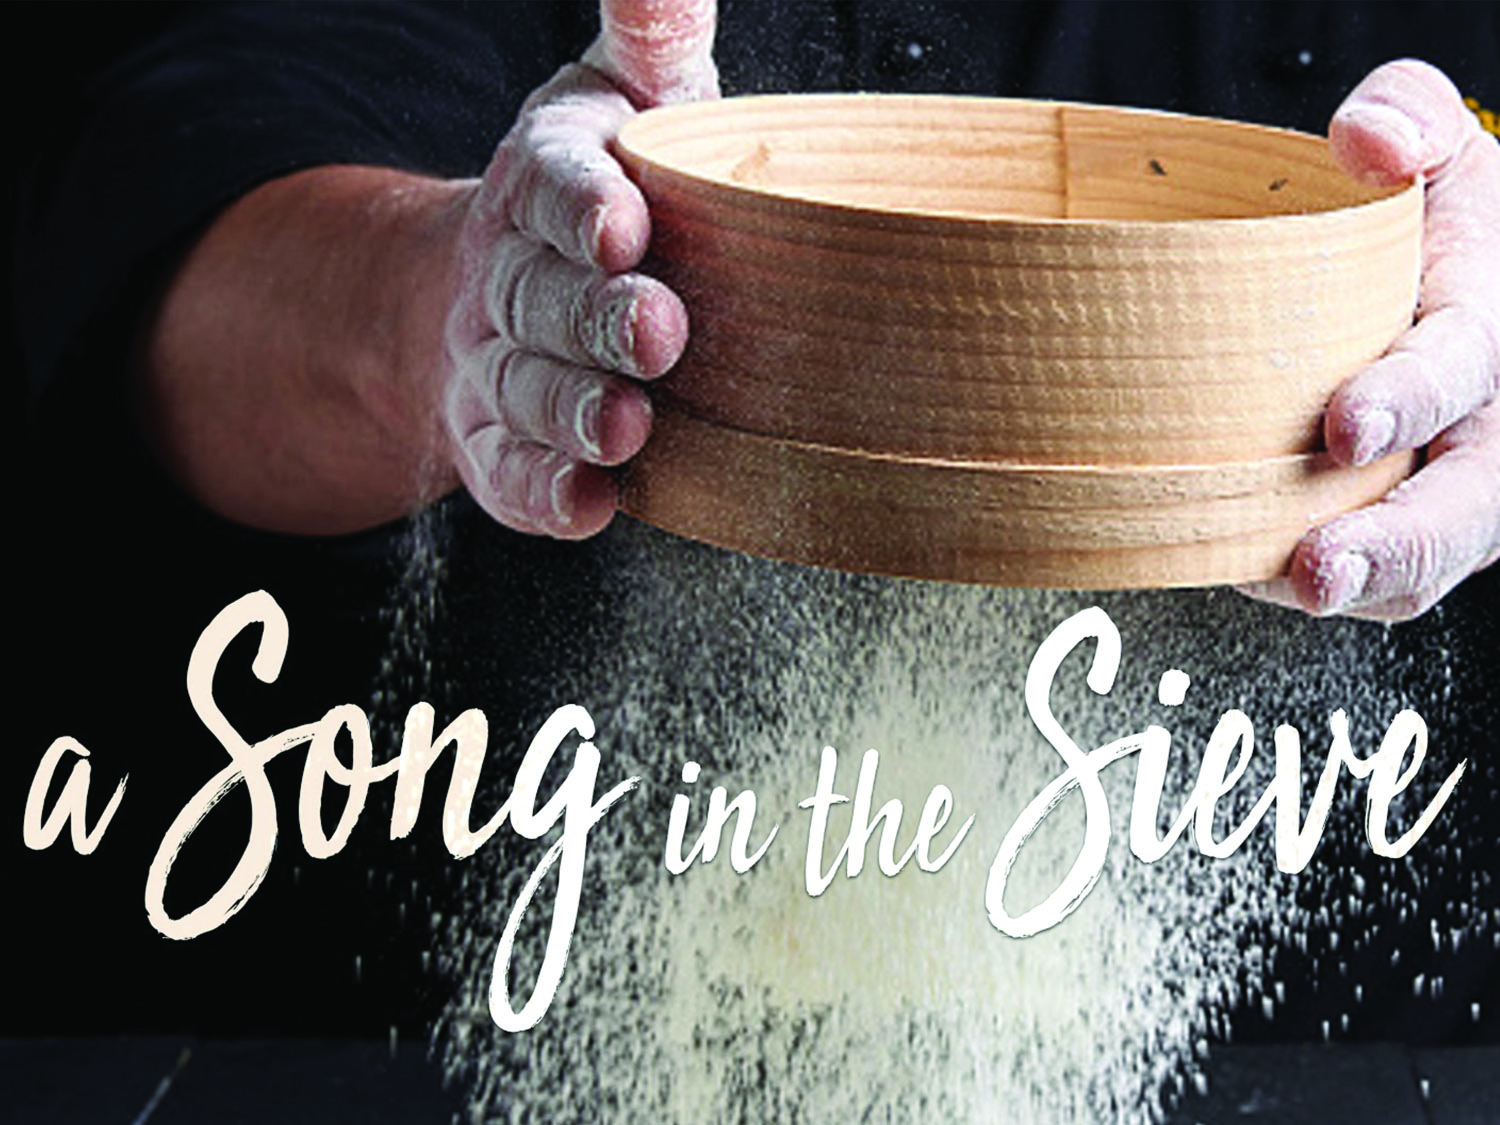 A Song in the Sieve